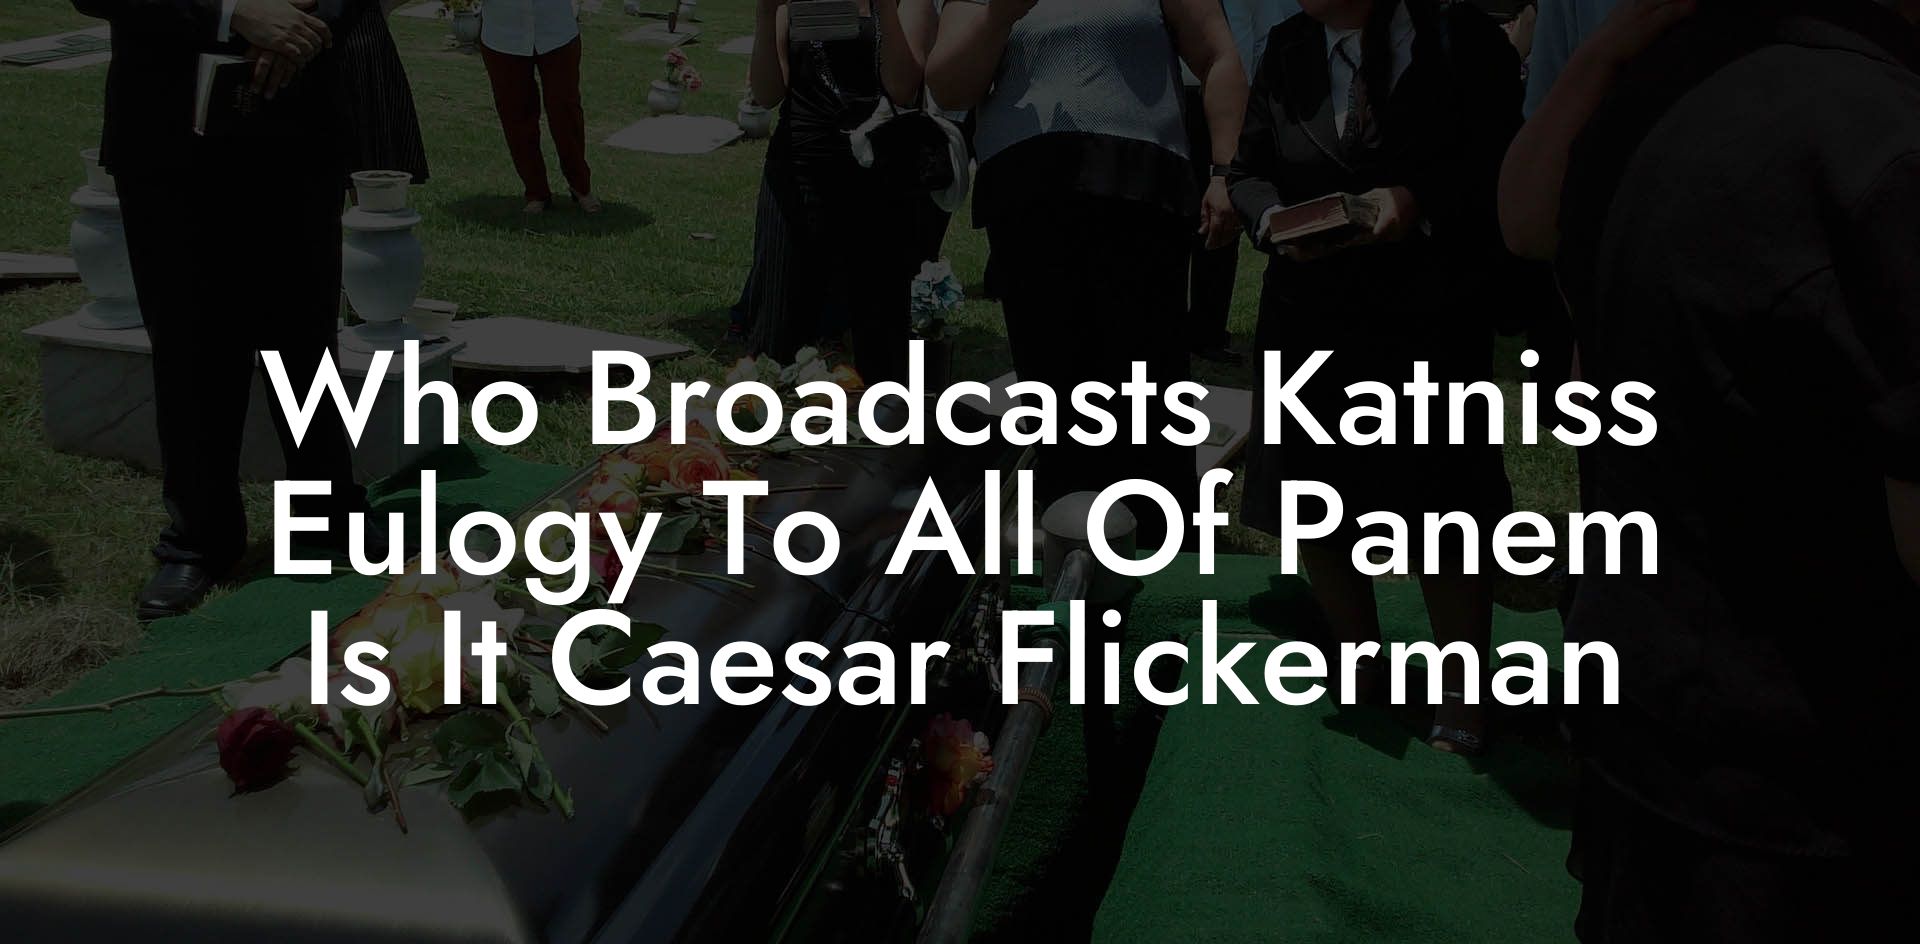 Who Broadcasts Katniss Eulogy To All Of Panem Is It Caesar Flickerman